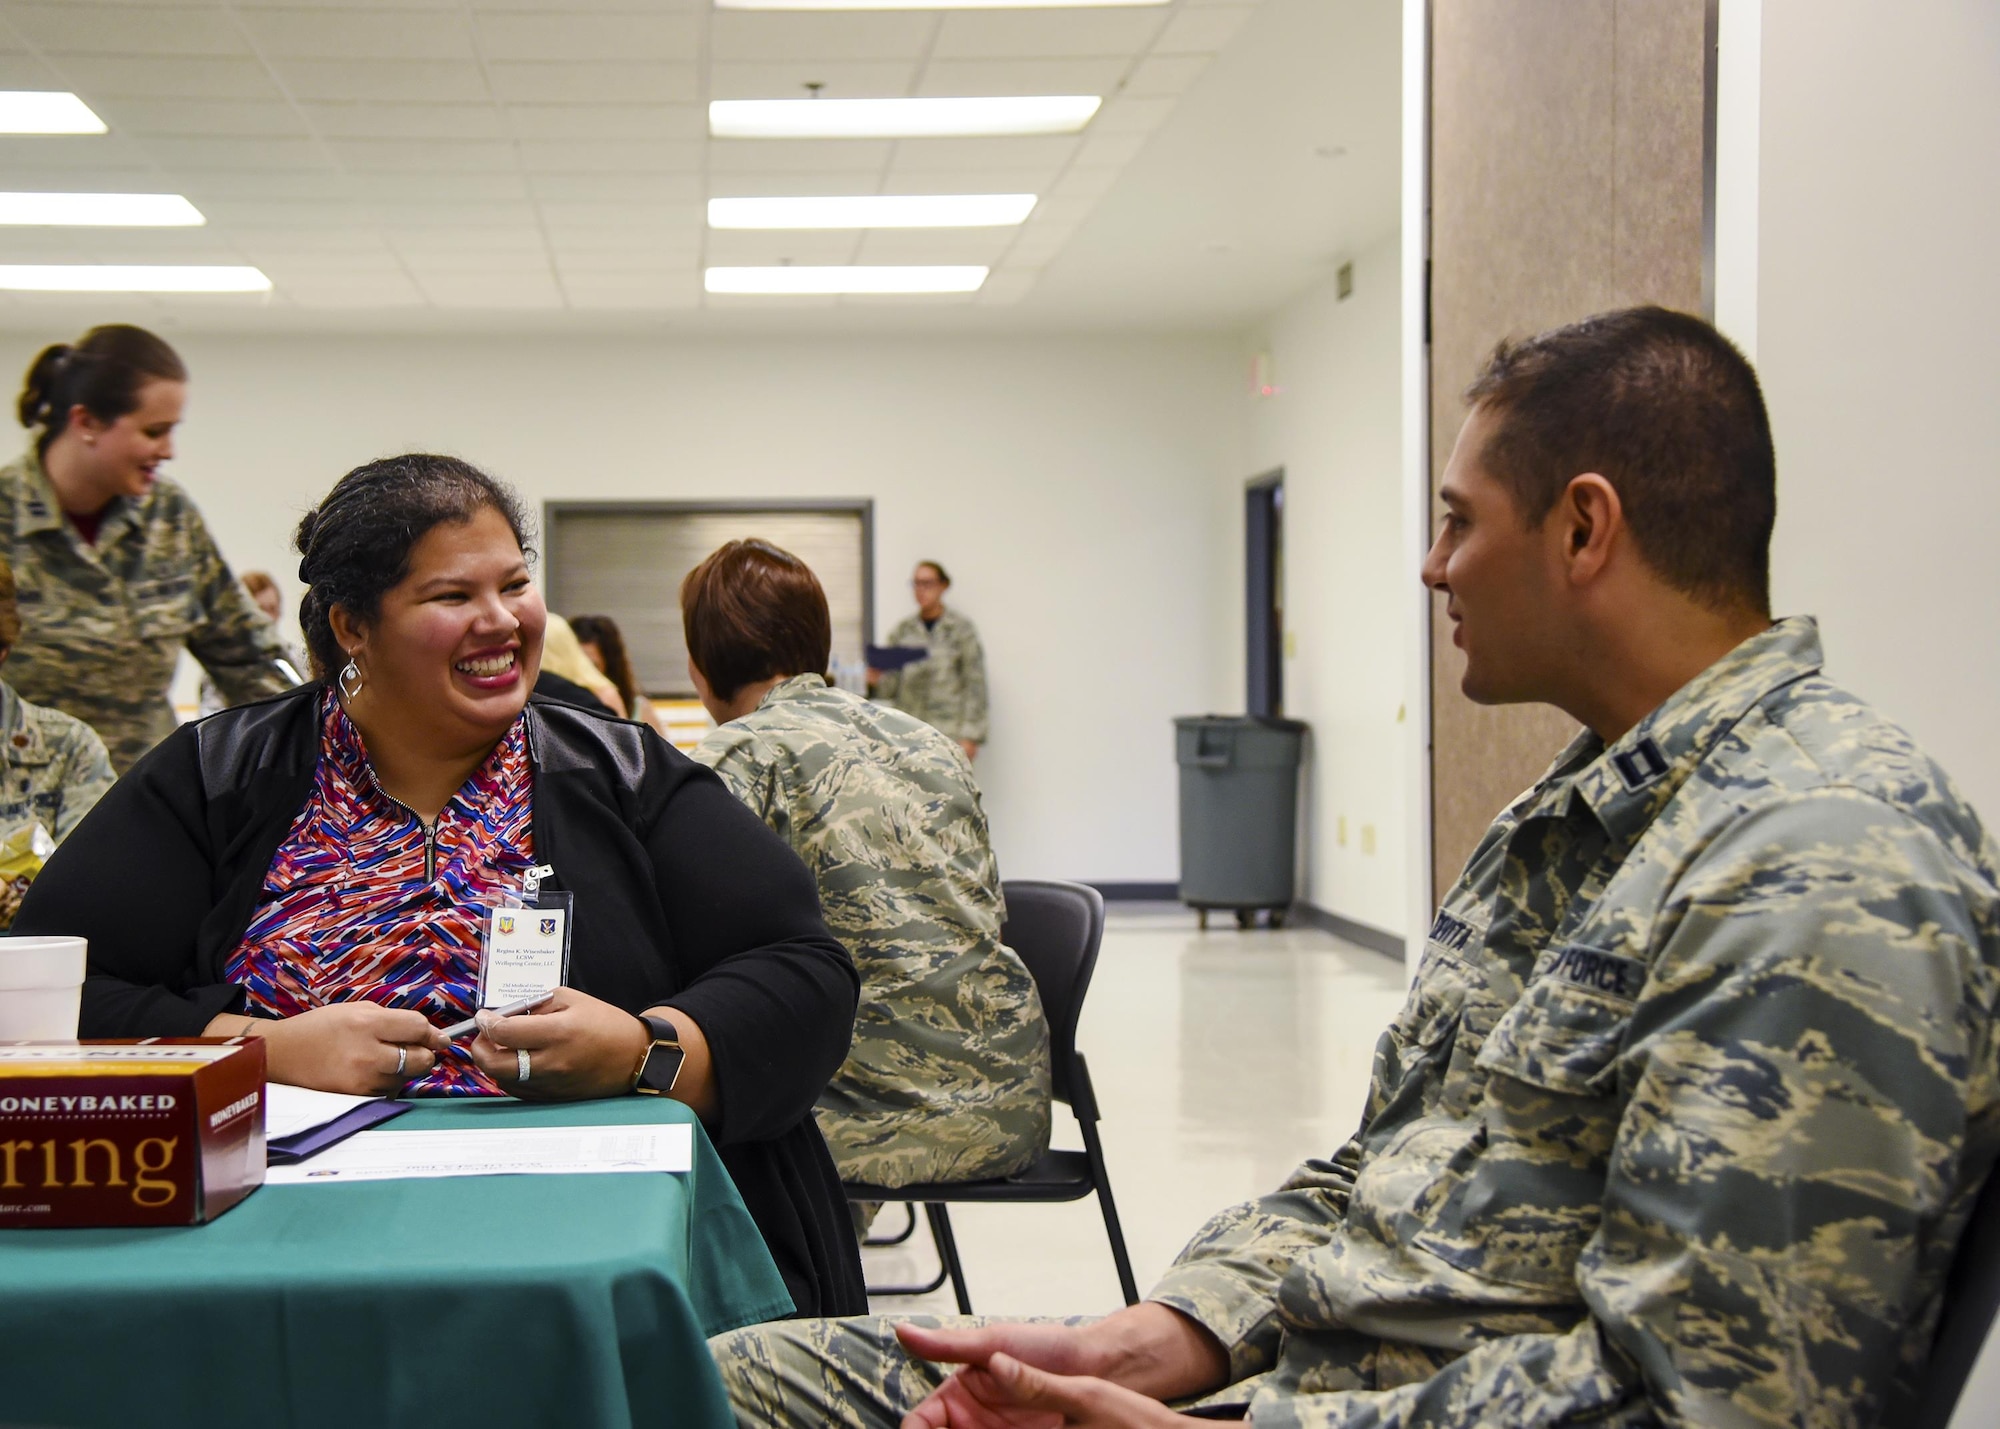 Capt. George Devitta, 23d Medical Group physician’s assistant, left, speaks to Regina K. Wisenbacker, a local medical professional, during a provider collaboration, Sept. 15, 2017, at Moody Air Force Base, Ga. The 23d Medical Group held this to allow base and community providers an opportunity to meet face-to-face to better understand the Airmen they are taking care of and provide feedback to help both sides improve. (U.S. Air Force photo by Airman Eugene Oliver)